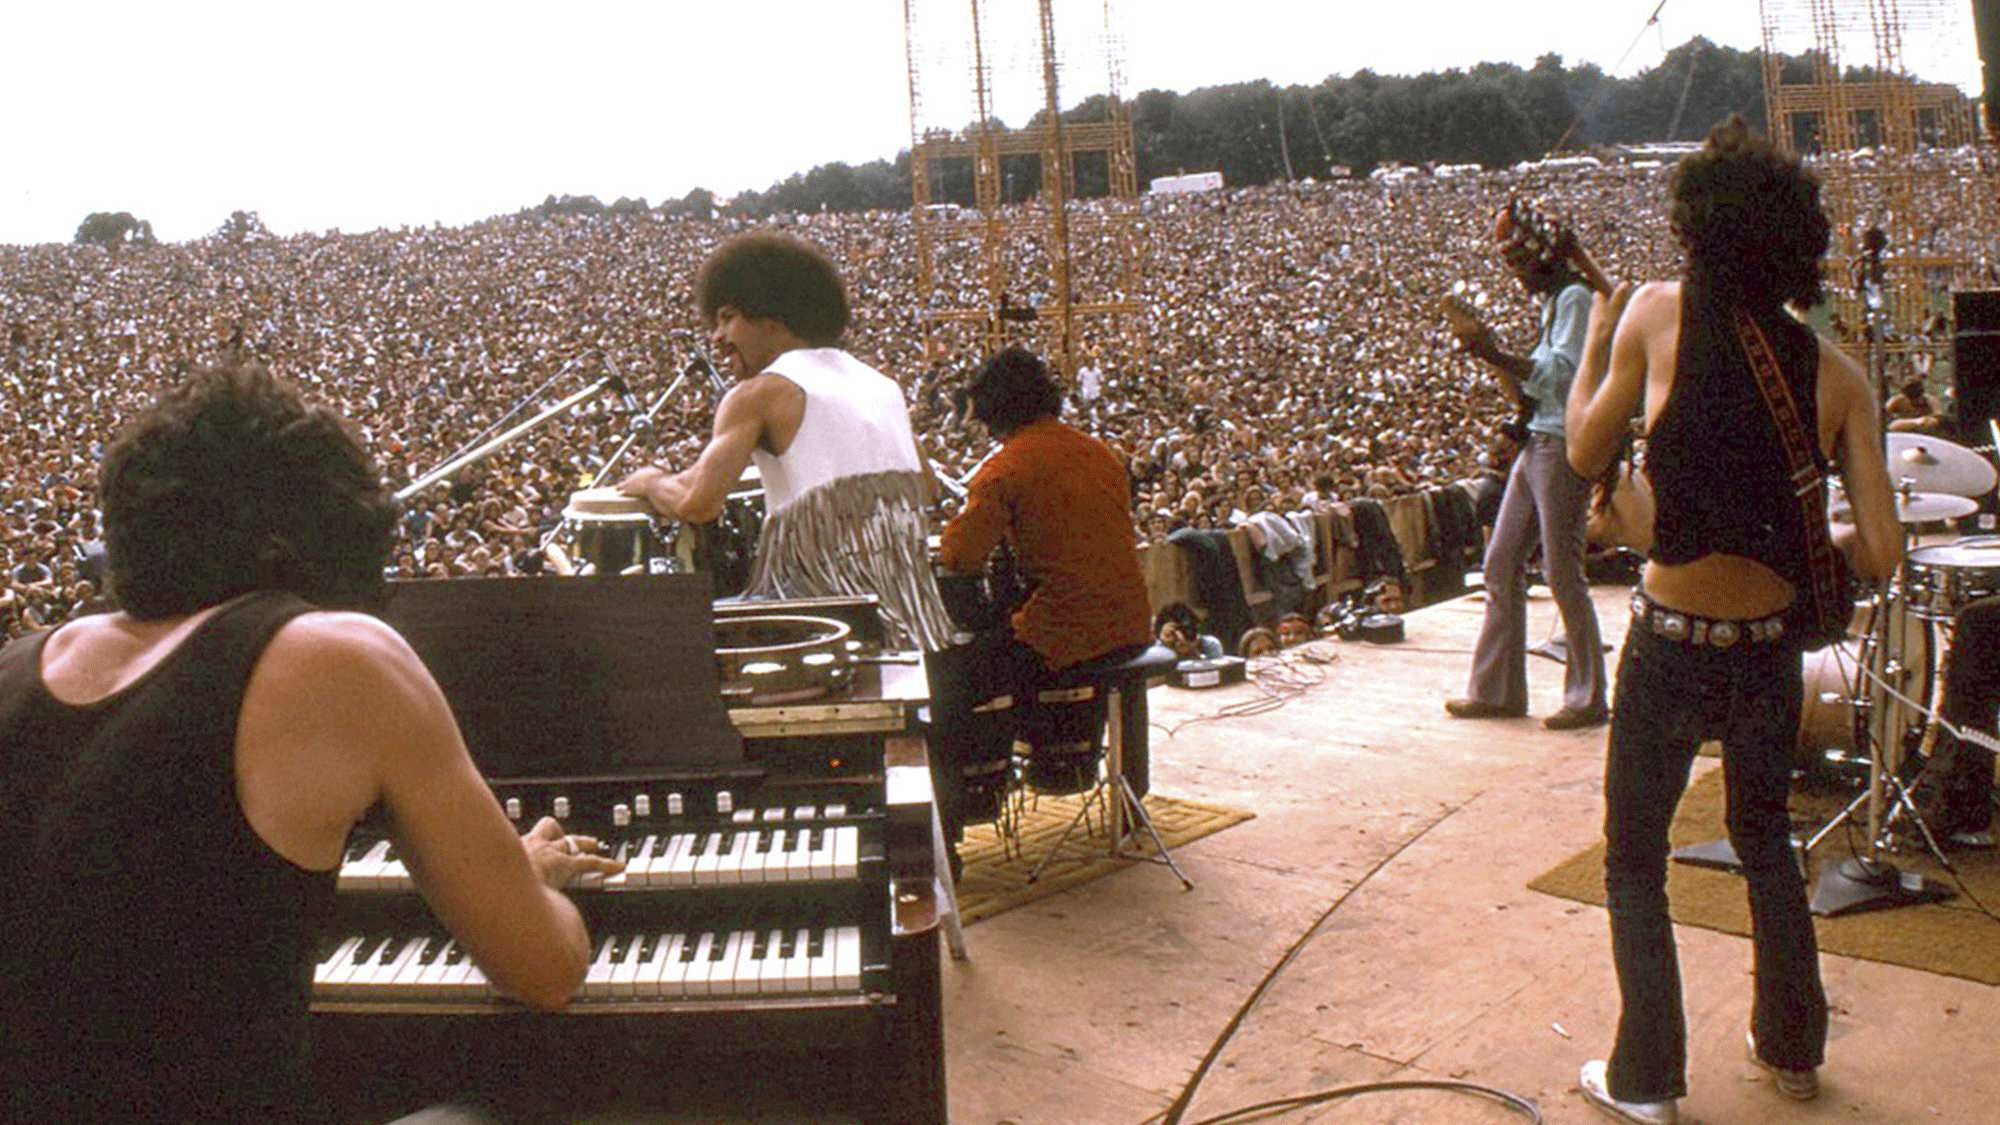 Woodstock: 3 Days of Peace and Music (Director's Cut - 1970/1994)